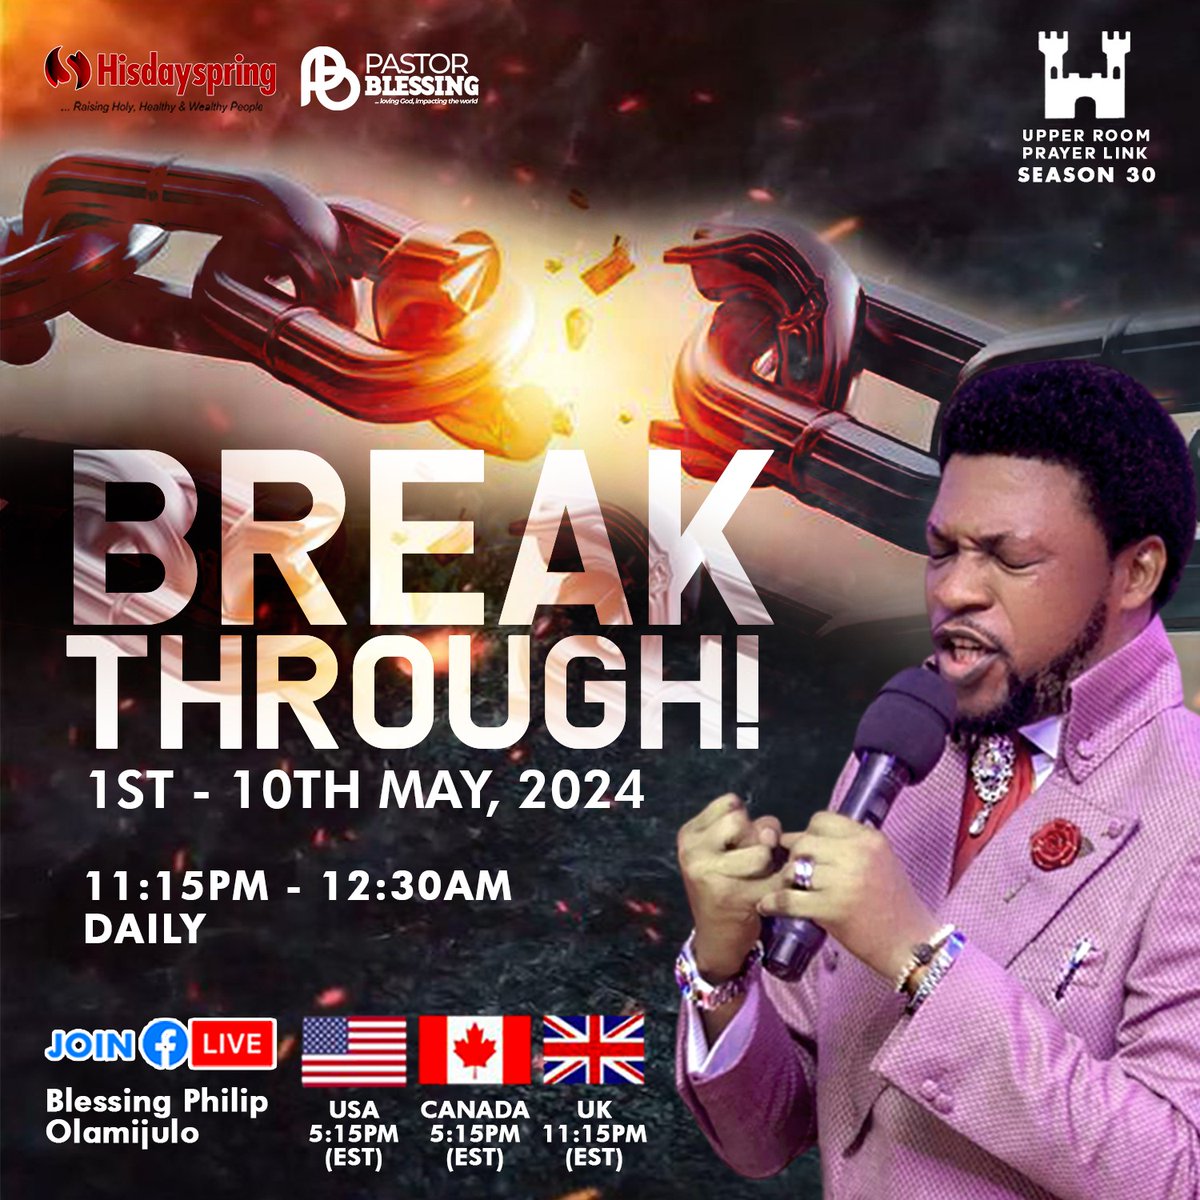 UPPER ROOM PRAYER LINK, Day 2 is #Live 🔥🔥 Click, connect, and pray 🙏 along with your fellow brethren facebook.com/share/v/MwZefq… #breakthrough #May2nd #prayerworks #JesusIsLord